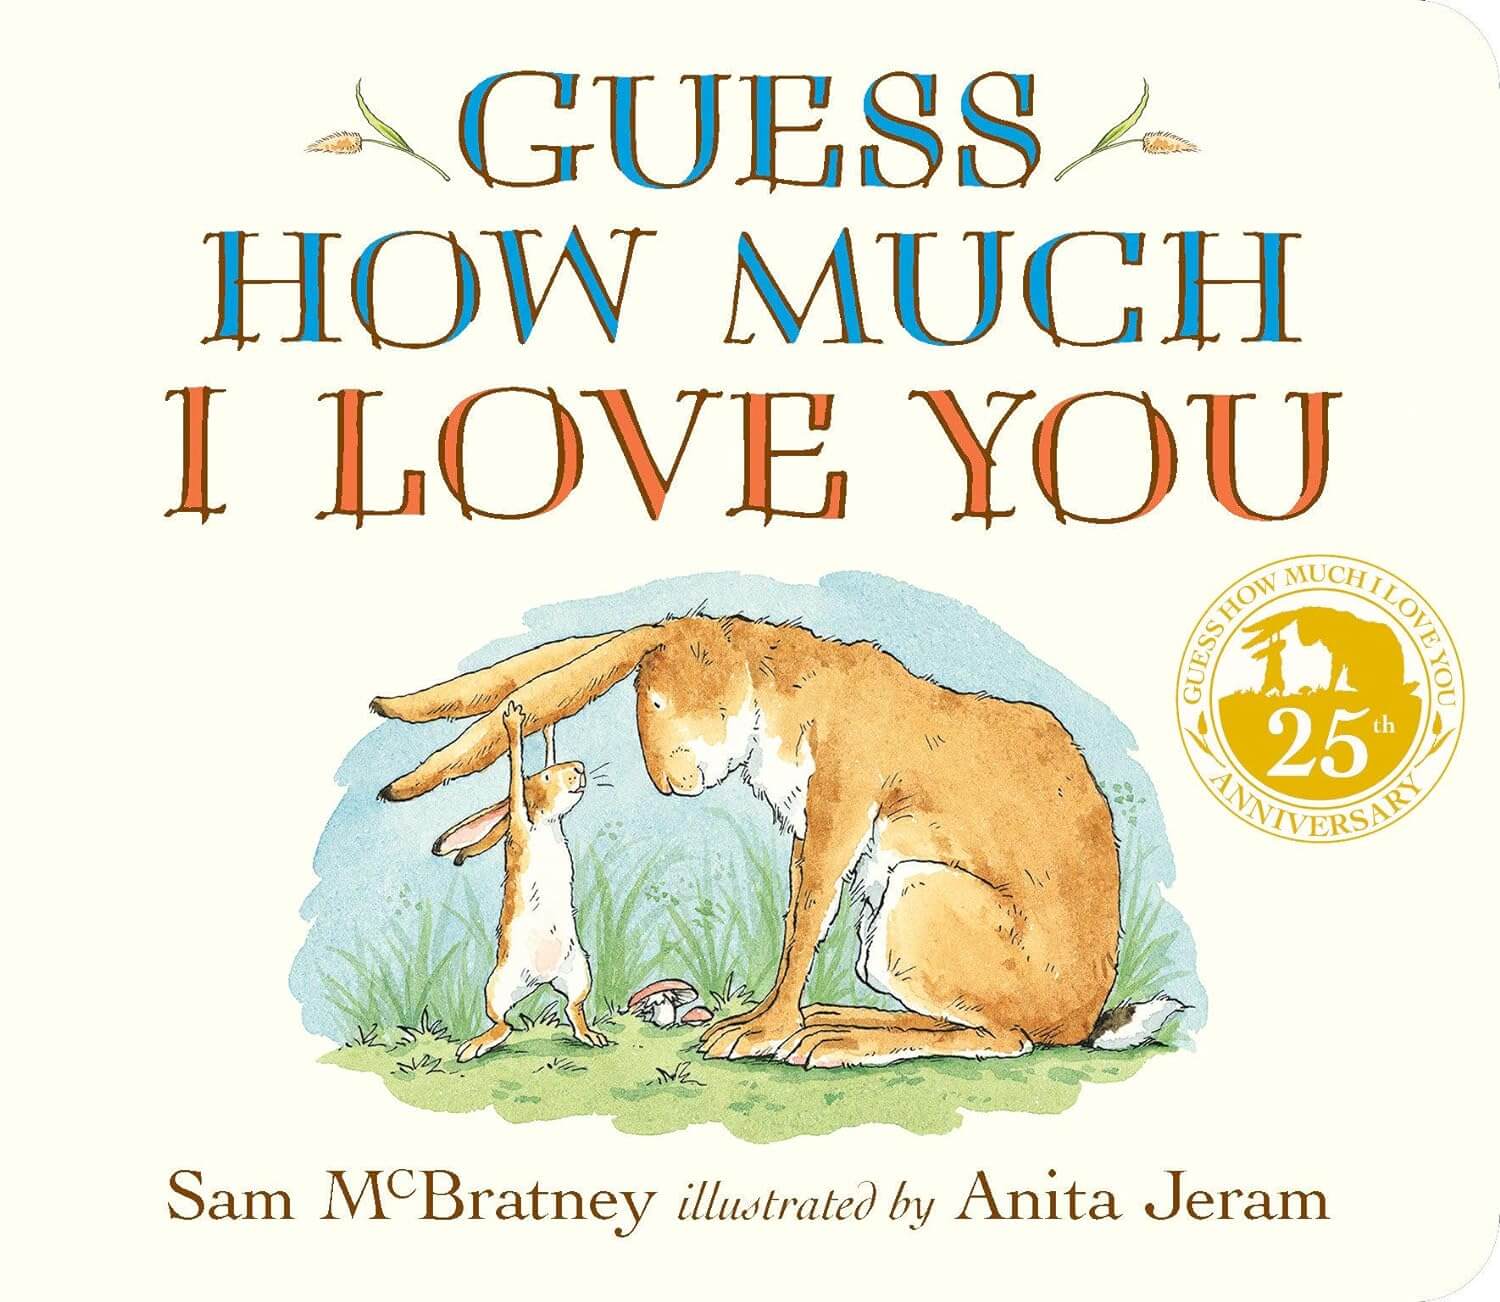 "Guess How Much I Love You" by Sam McBratney